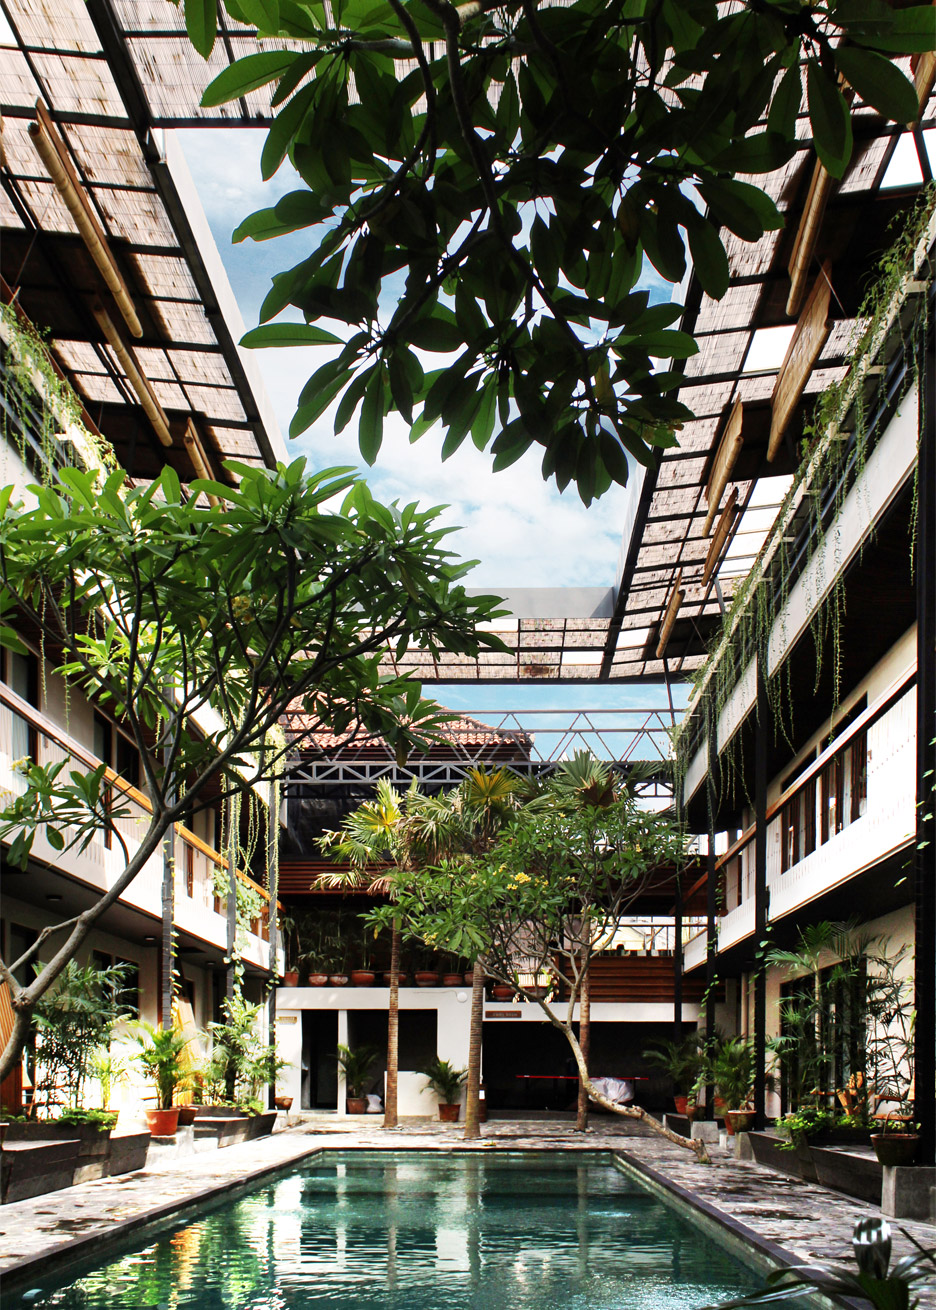 Roam Co-living housing complex in Bali, Indonesia by Alexis Dornier